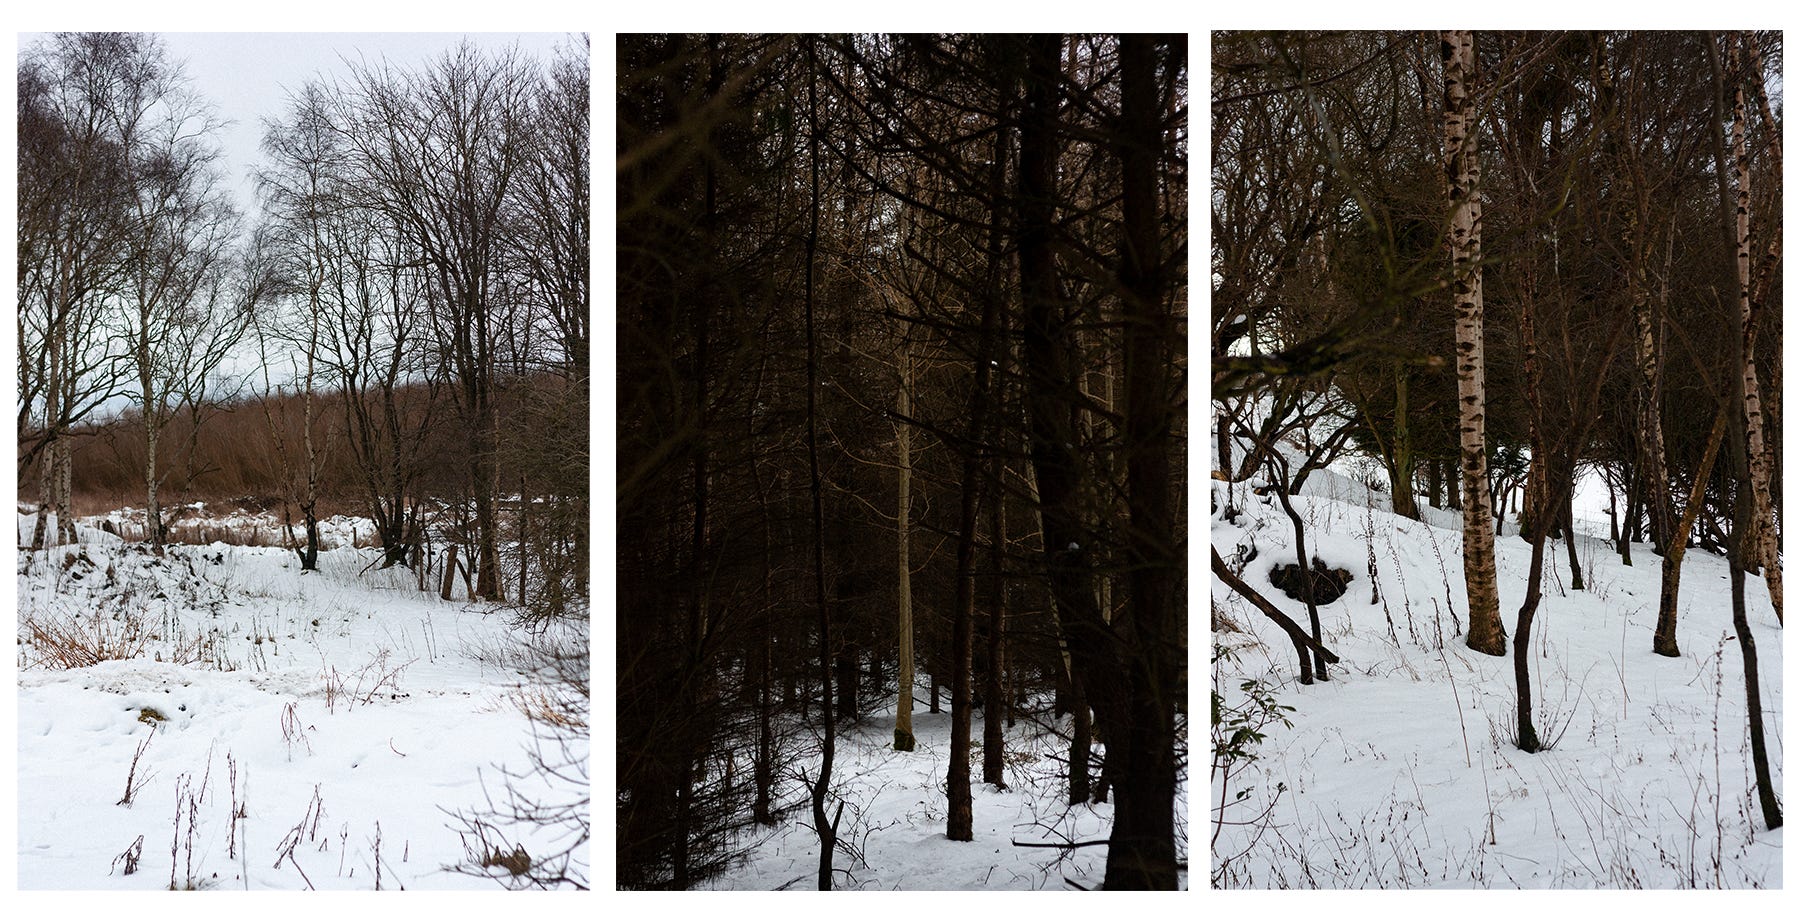 A triptych of photographs of a snowy woodland, the middle image focuses on a single tree in the midst of deep forest.